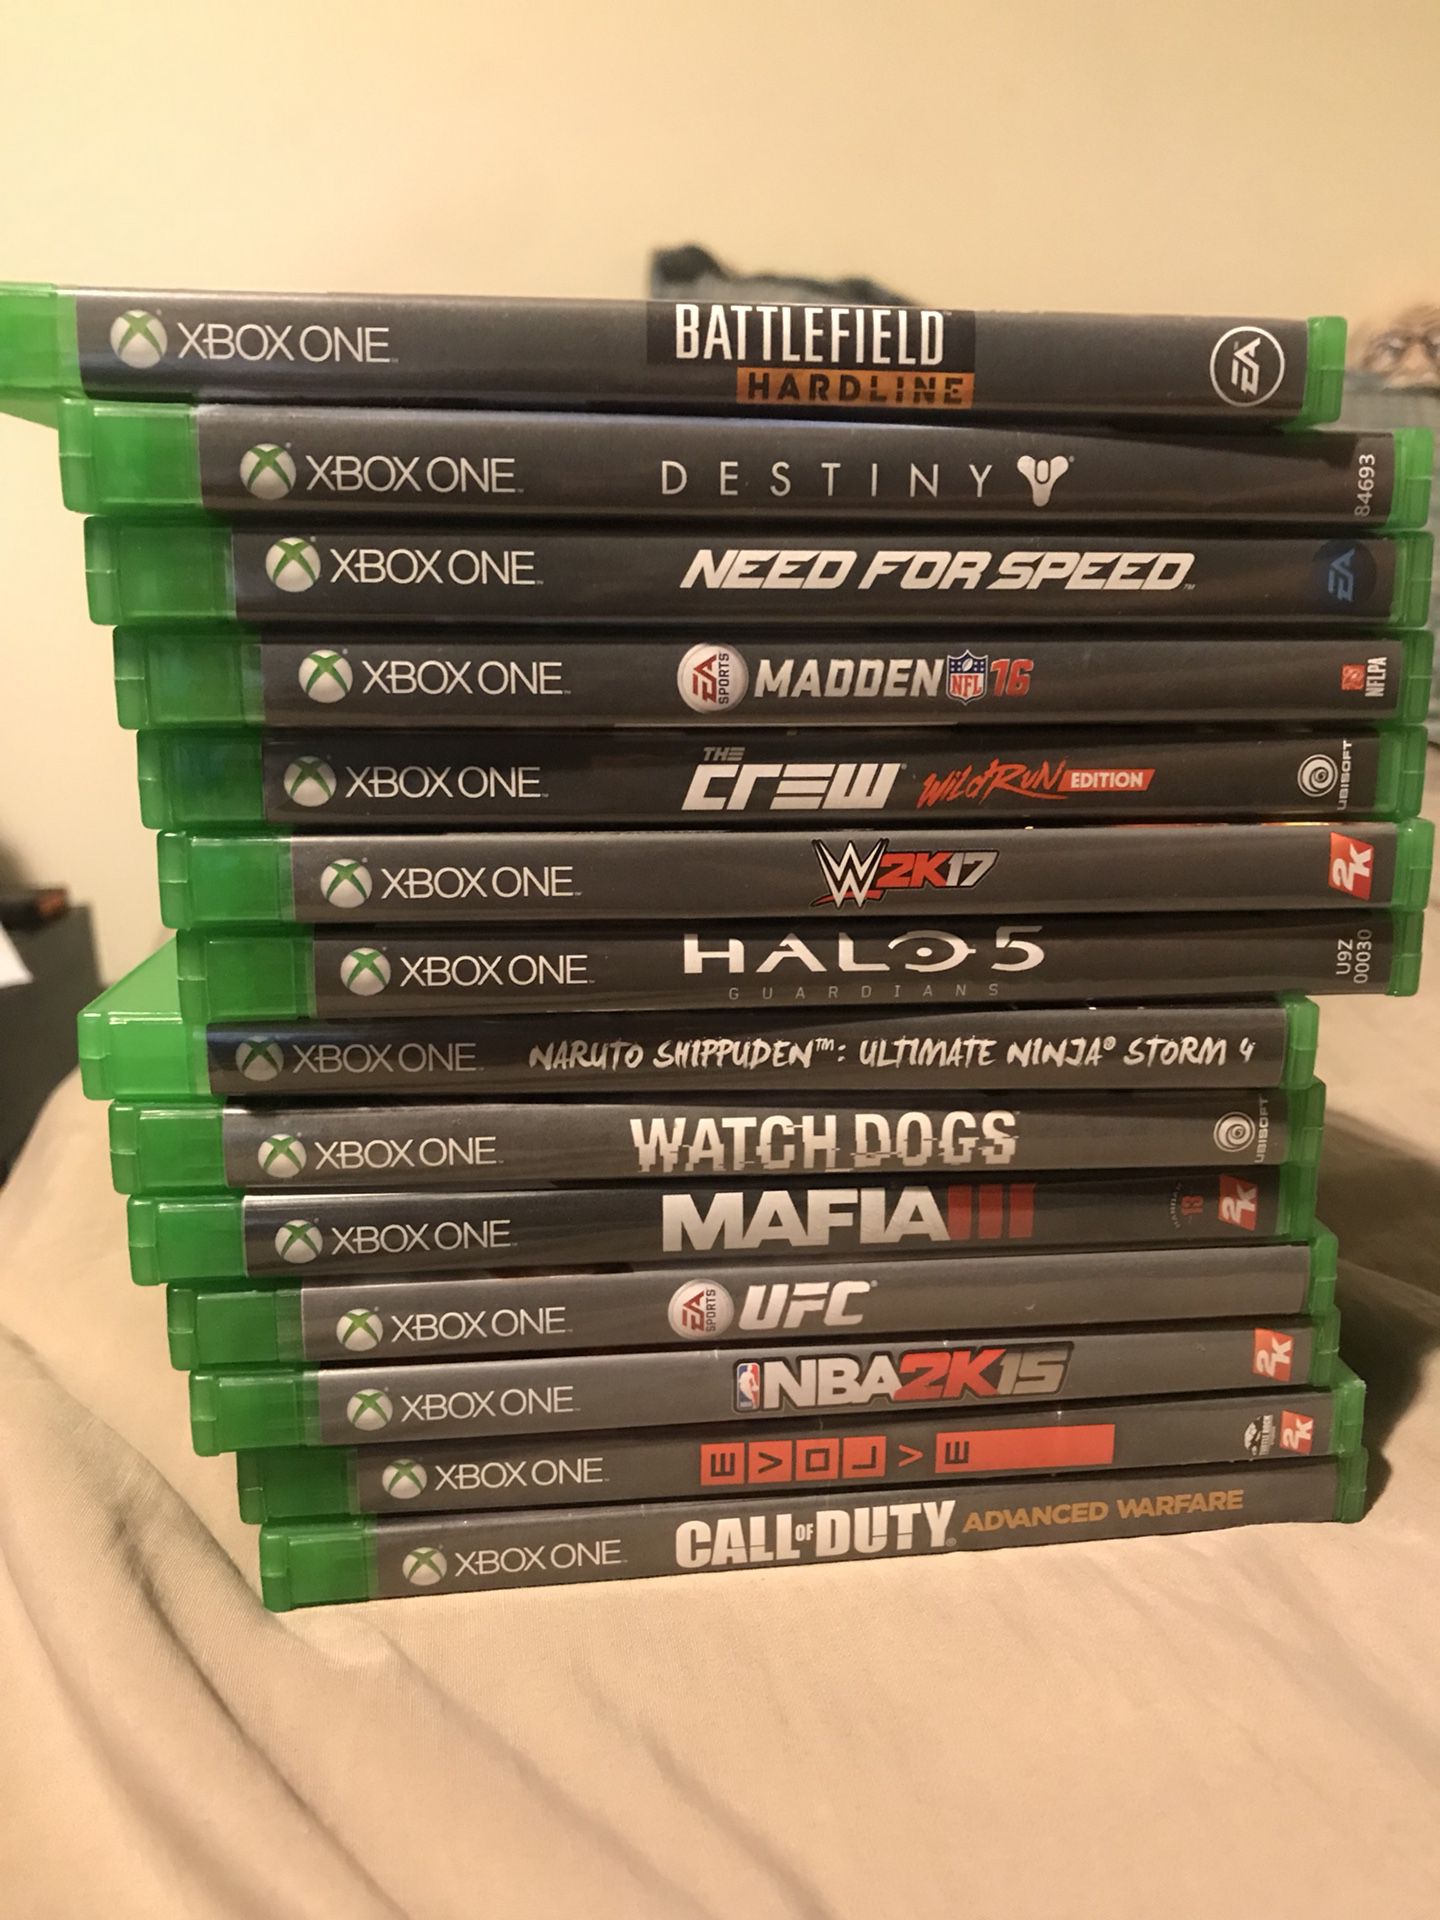 All my Xbox one games